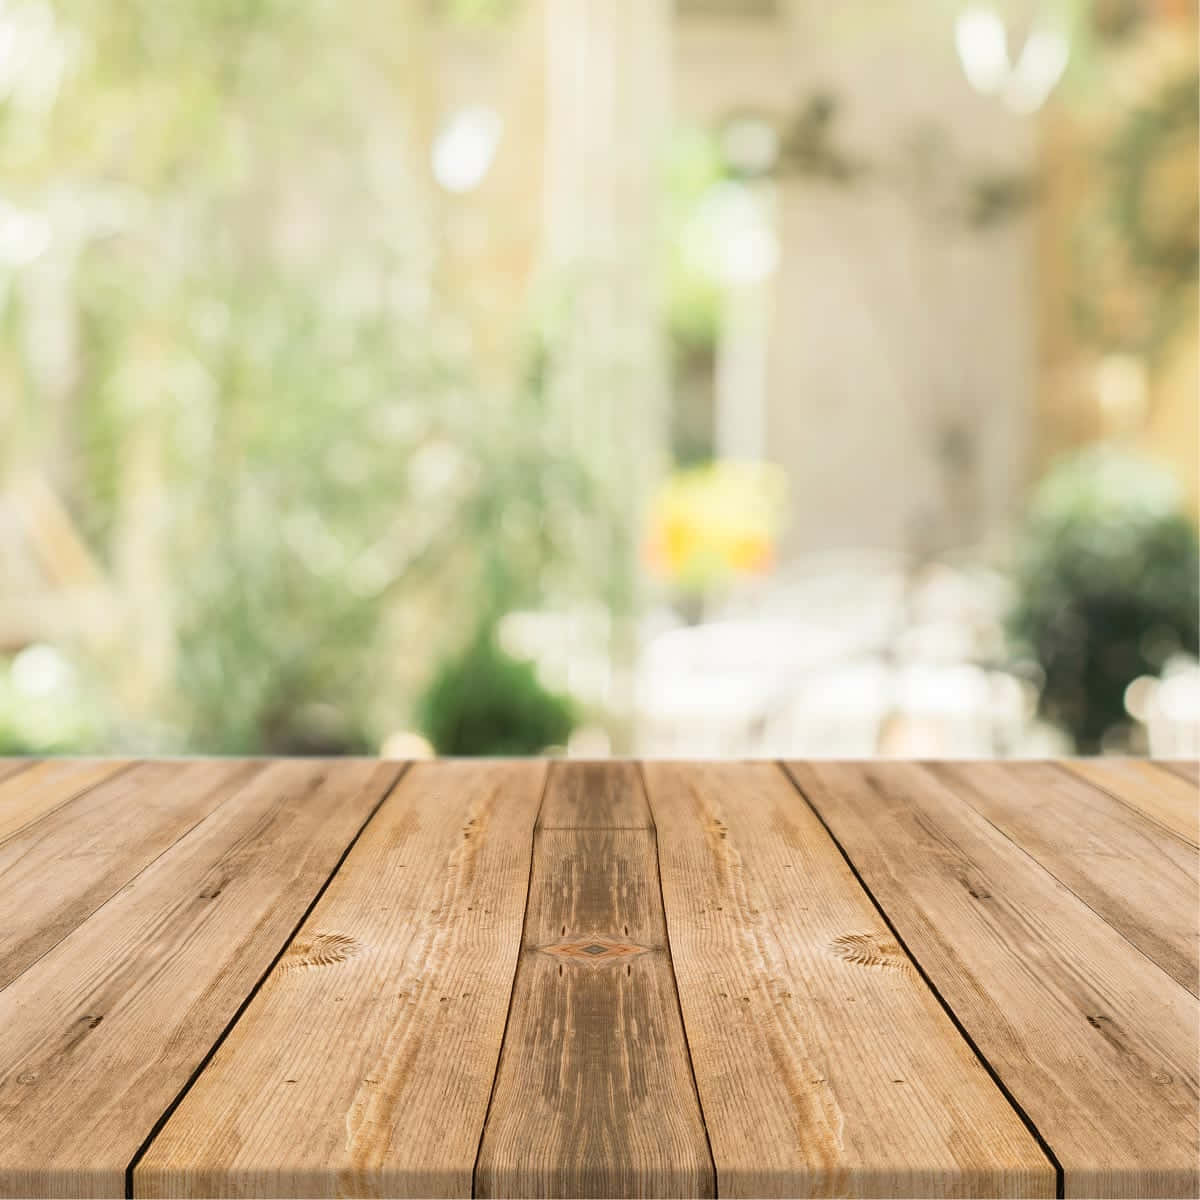 Blur Zoom Background Wooden Table